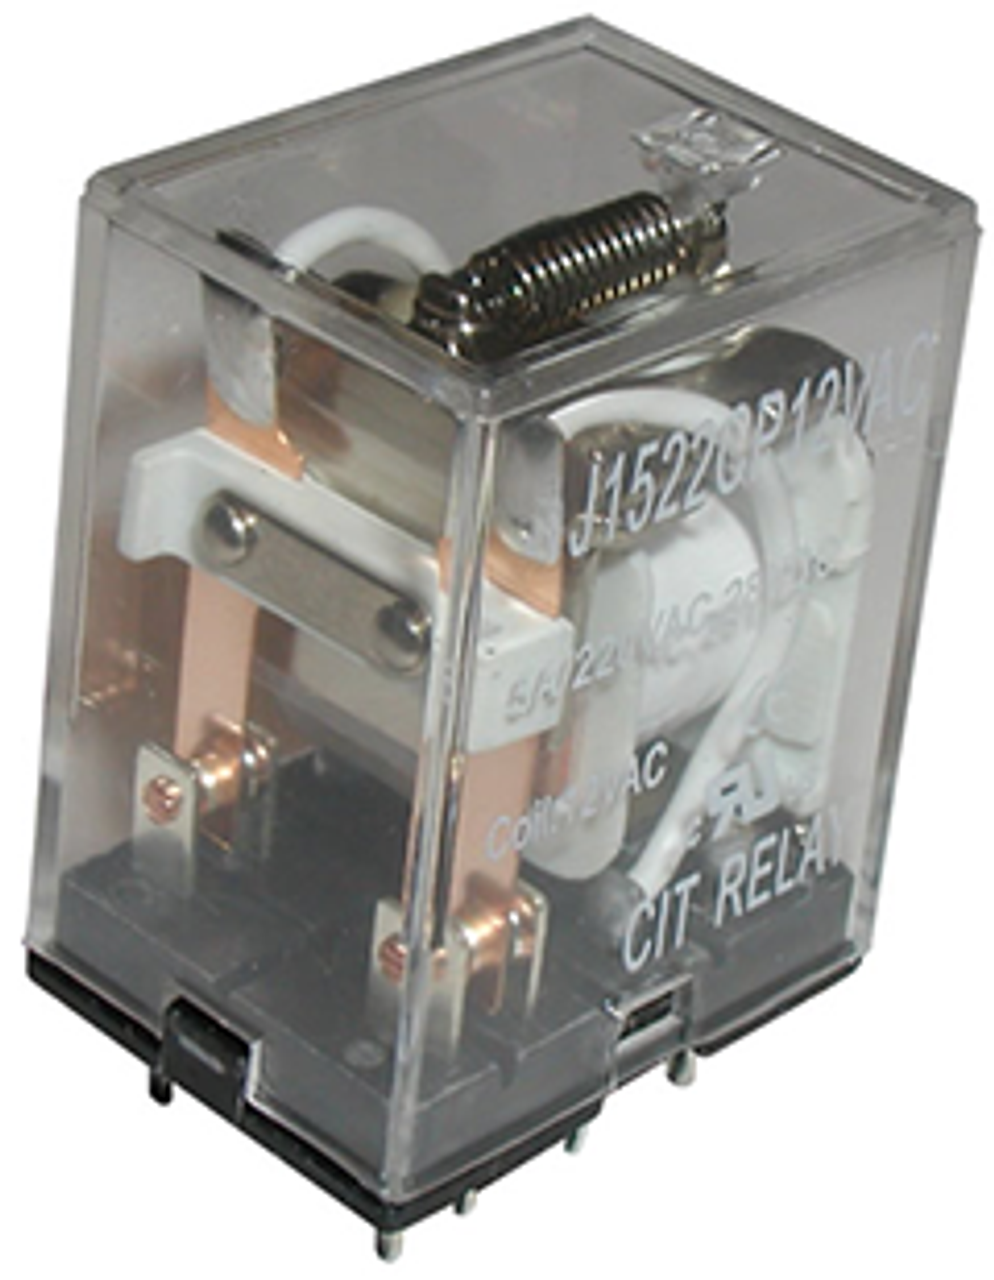 CIT Relay and Switch J1523CT220VACT Industrial Relays